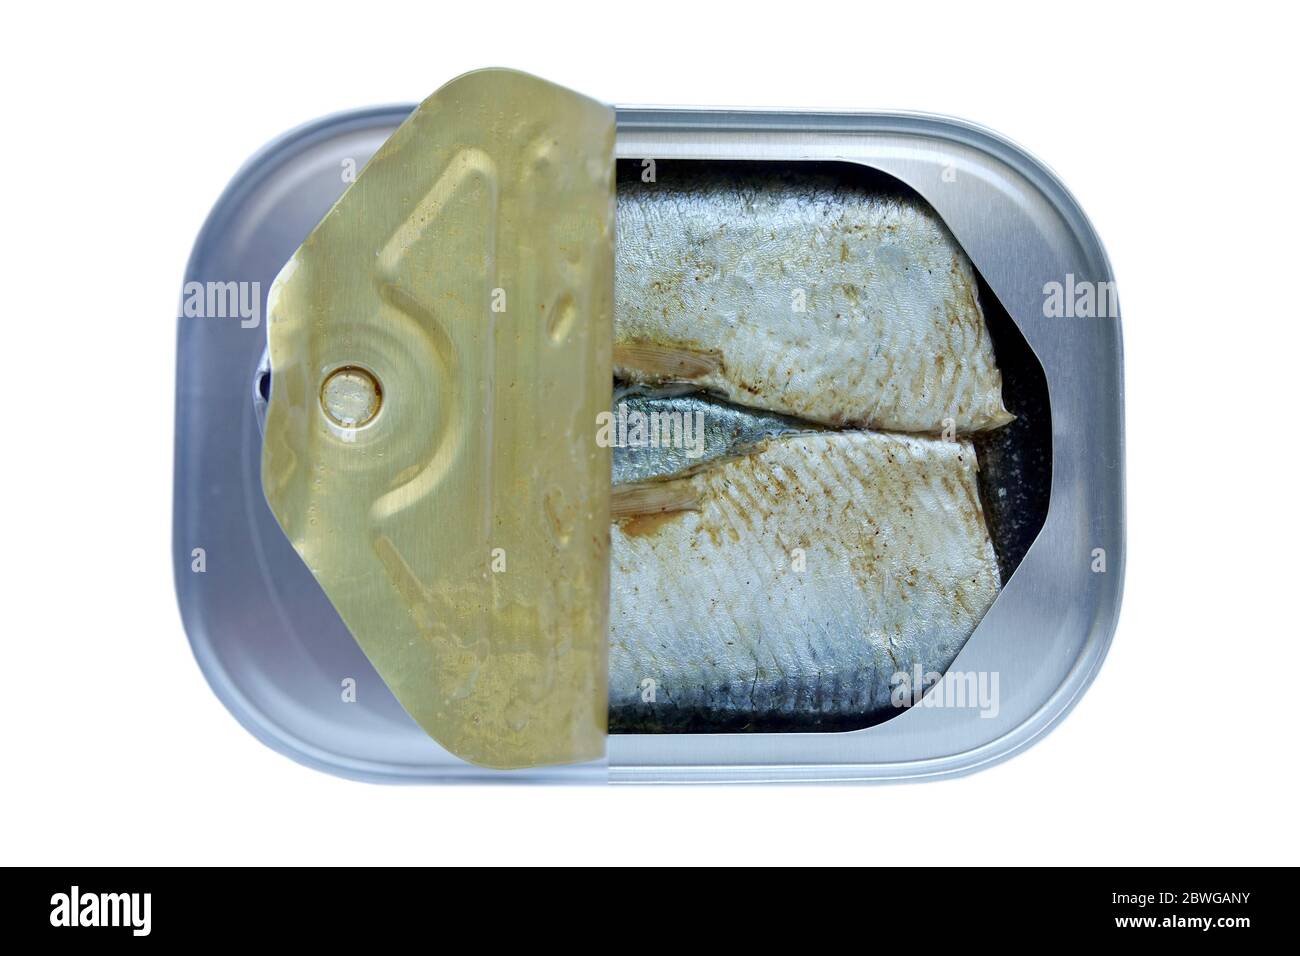 Traditional Ring Pull Can Of Sardines Just Opened With The Top Curled Back Stock Photo